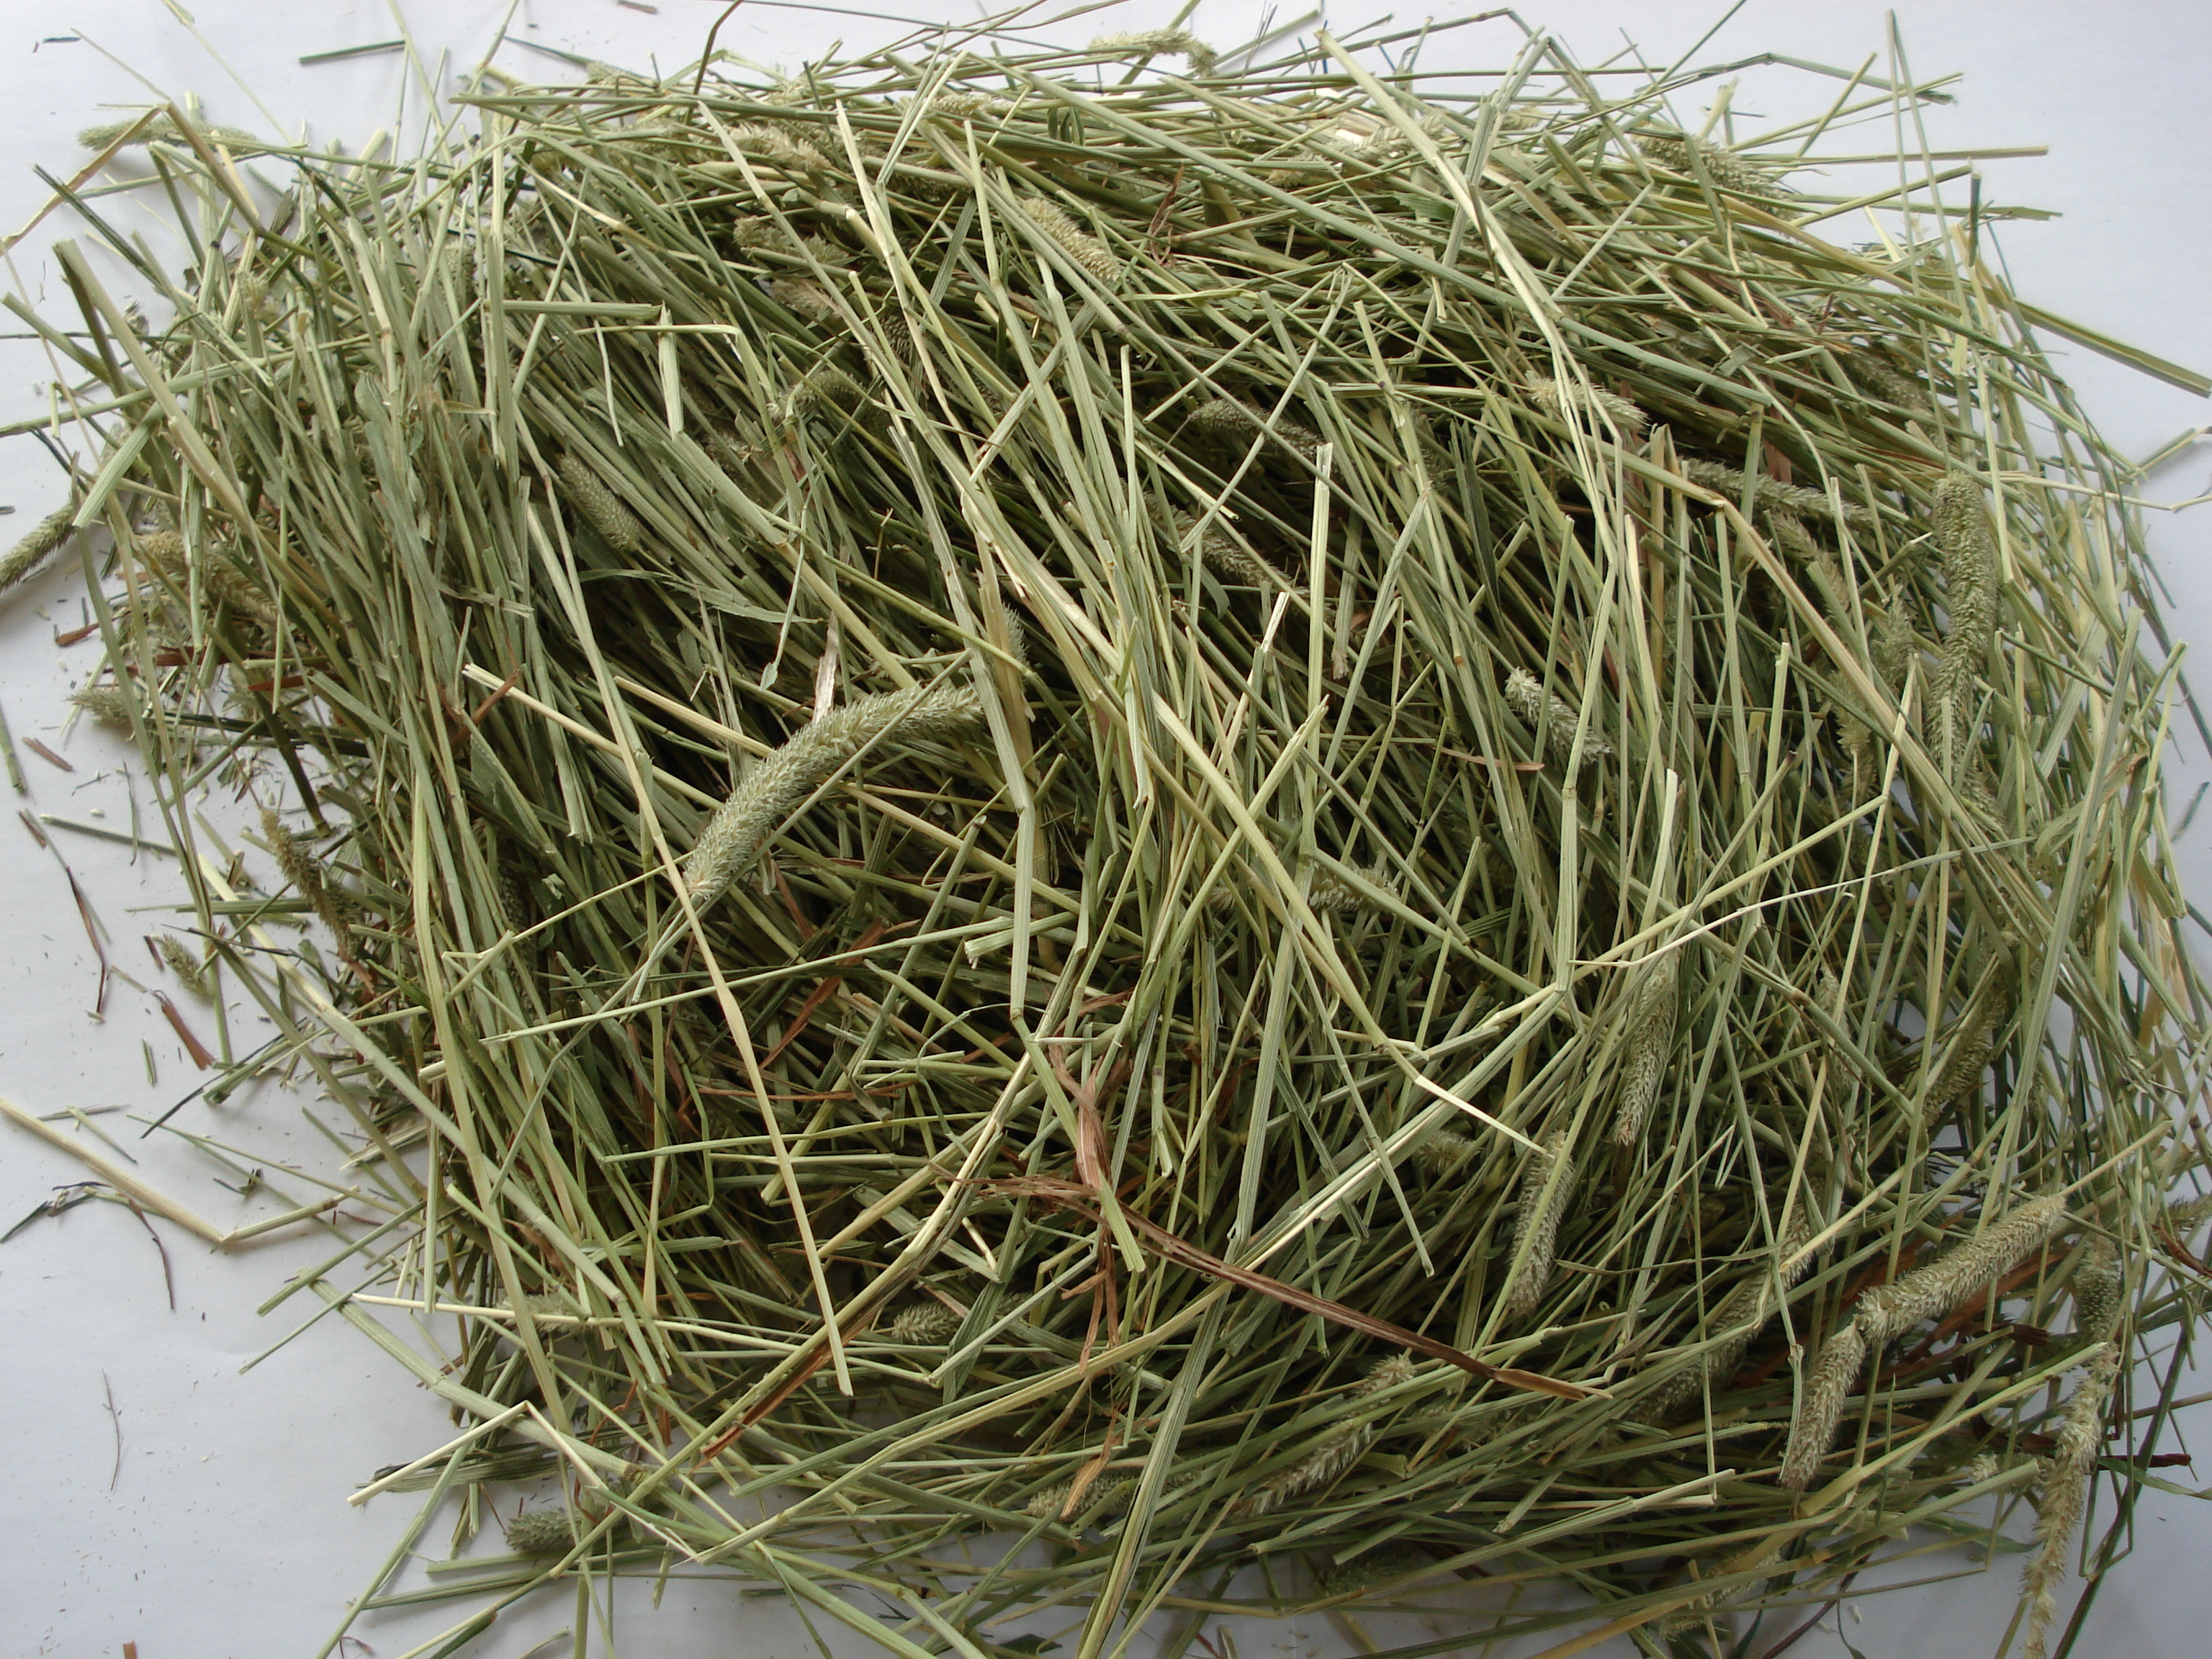 timothy hay for rabbits